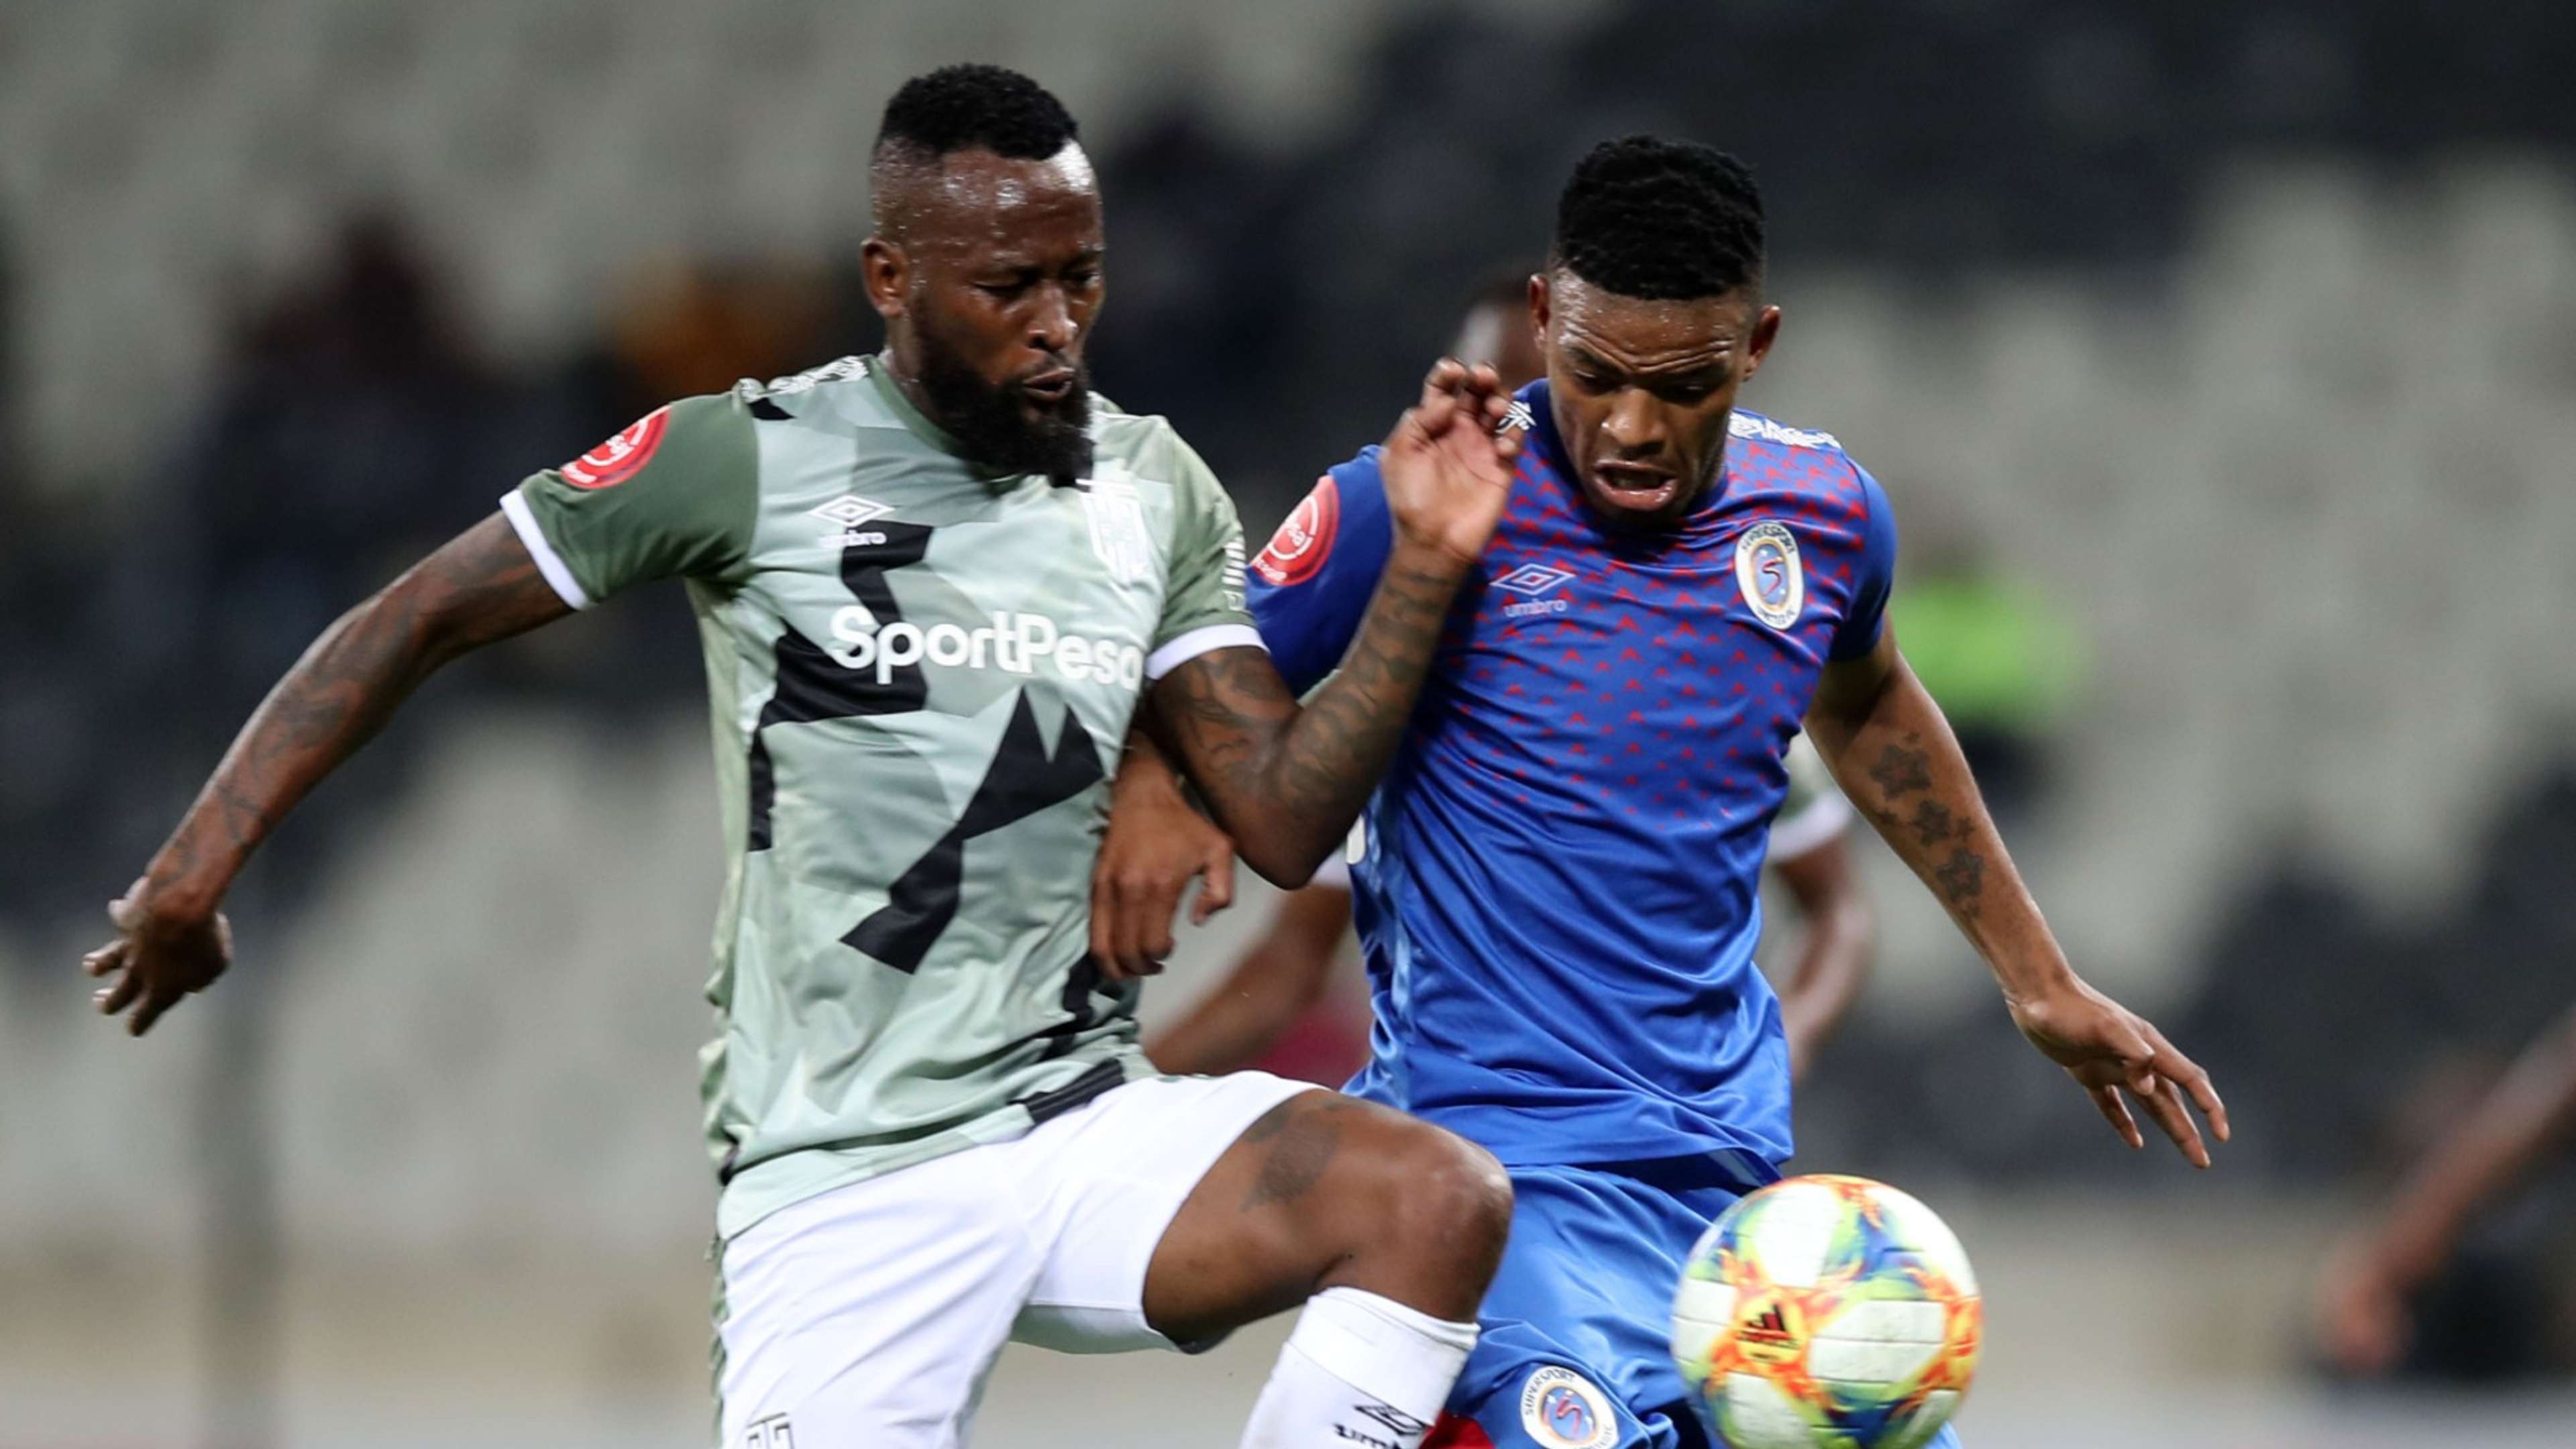 Sipho Mbule of Supersport United challenged by Mpho Makola of Cape Town City, September 2019